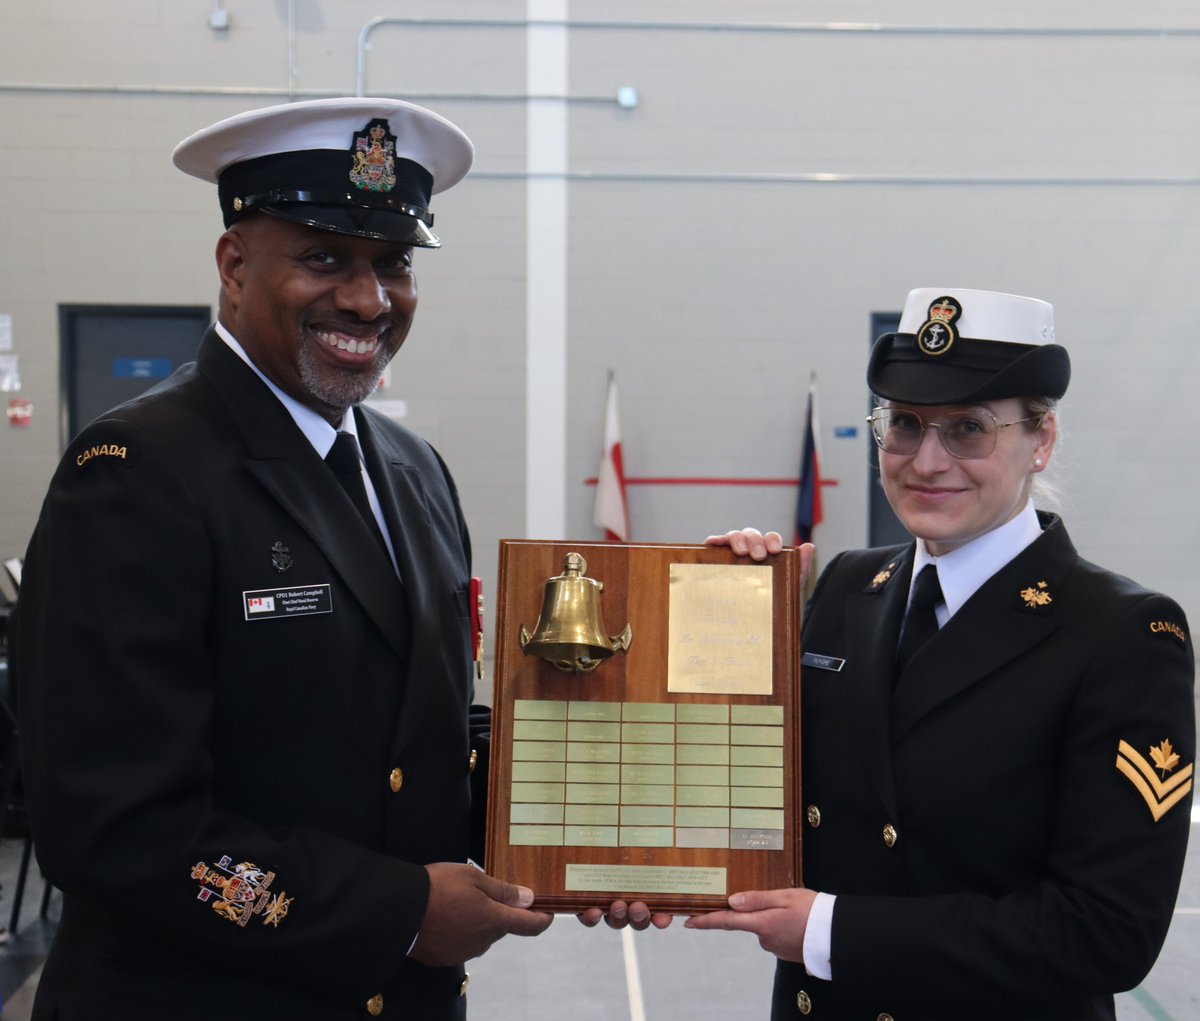 Congratulations to our 5th #HMCSMalahat Annual Awards’ recipient, MS Huyghe, who was awarded the Coxn’s Memorial Trophy, presented to the Junior NCM who possesses the best potential to become Coxswain of HMCS Malahat.

#WeTheNavy #ReadyAyeReady #victoriabc #yyj @RoyalCanNavy